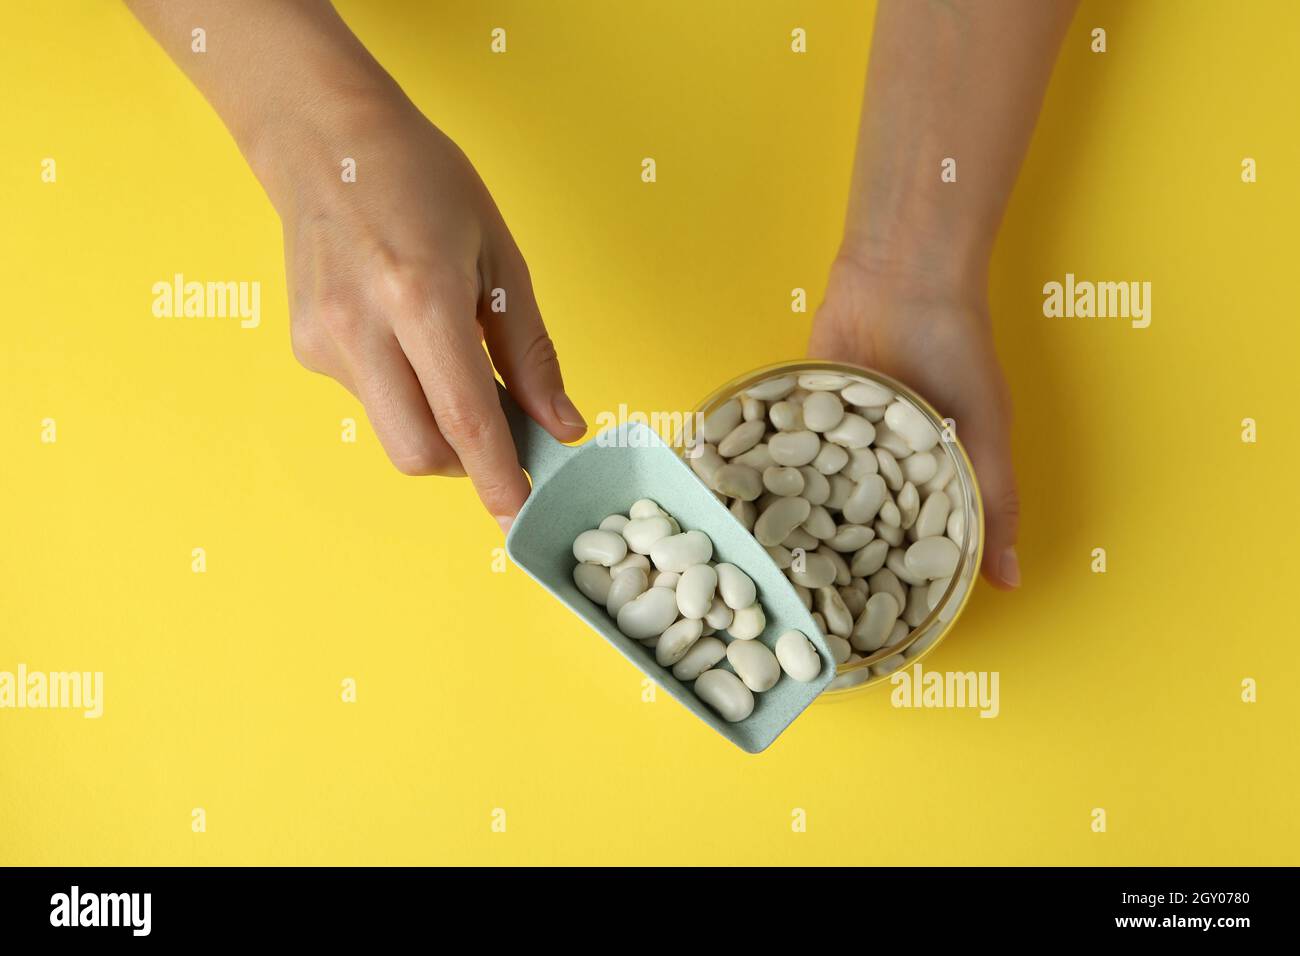 Female hands hold jar and scoop with white beans on yellow background. Stock Photo